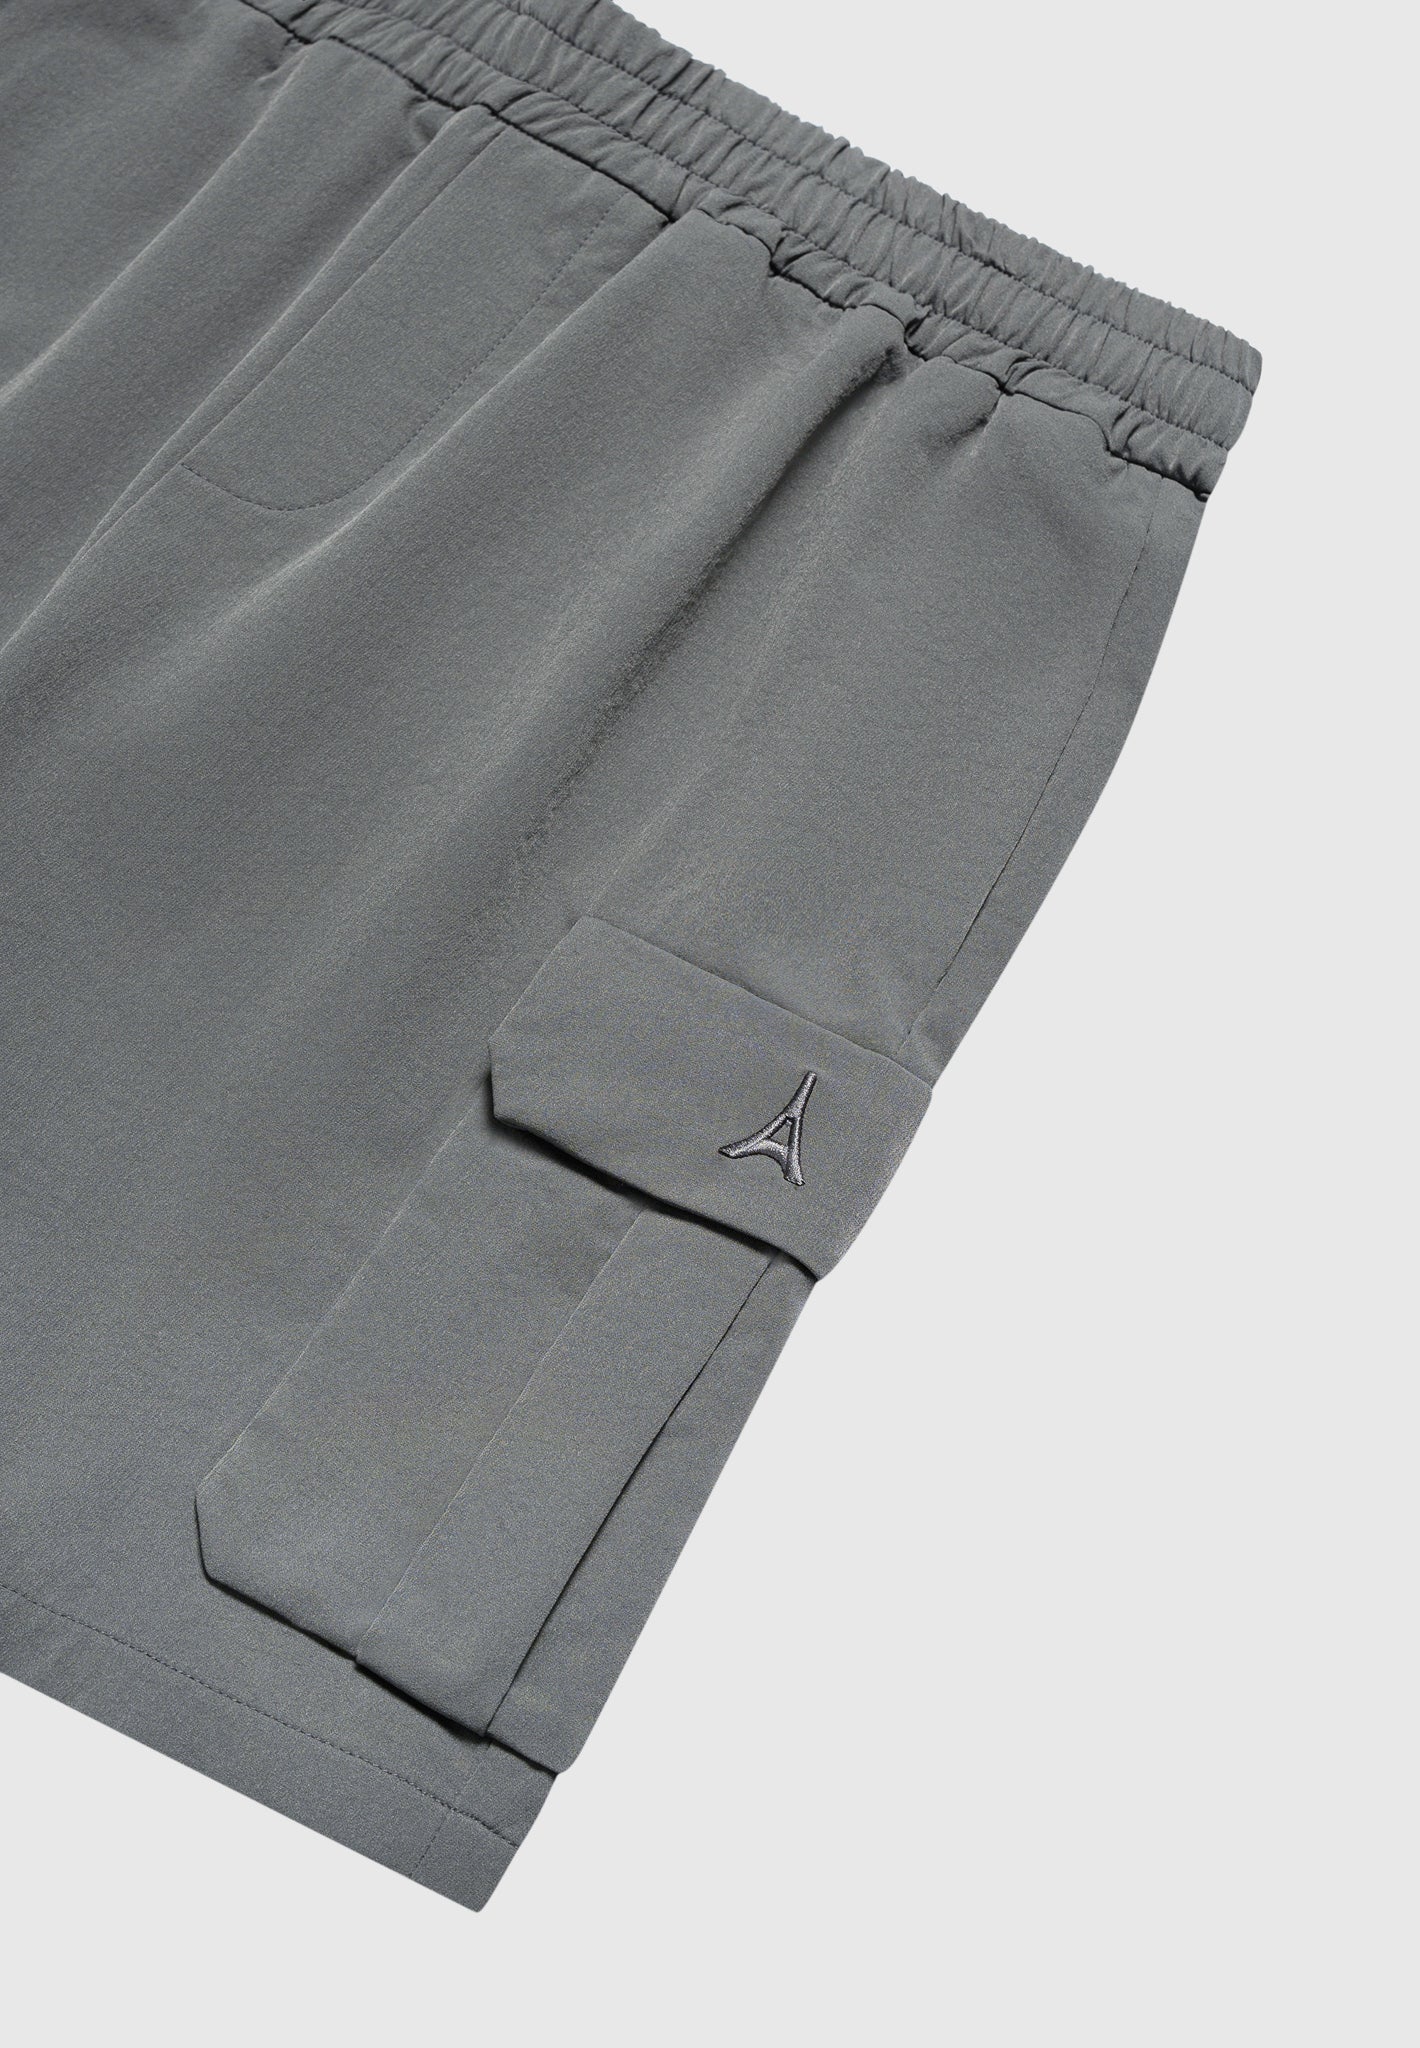 technical-cargo-shorts-charcoal-grey